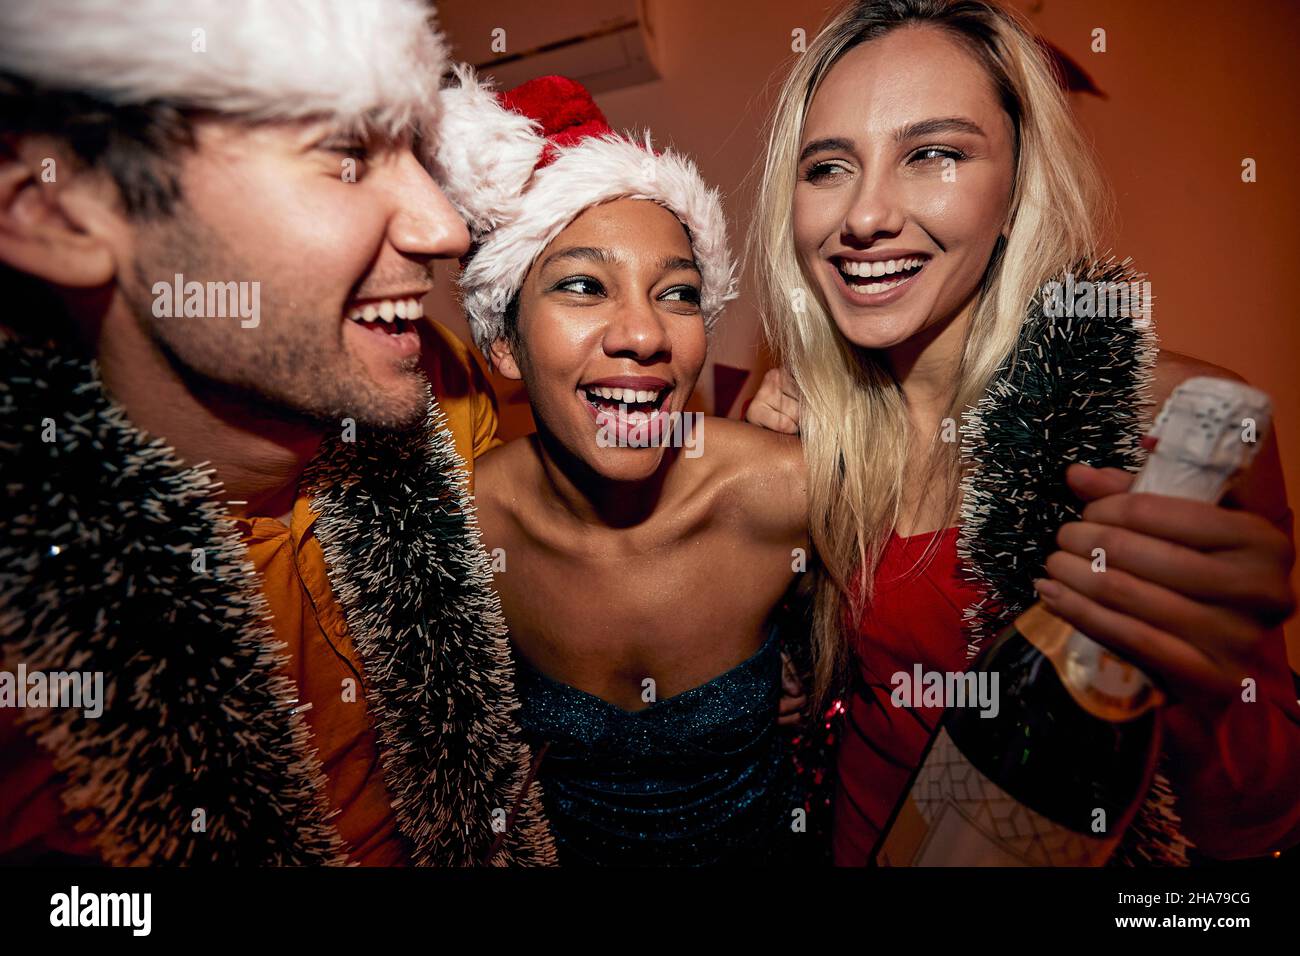 happy people Celebrating At New Year Party Together Stock Photo